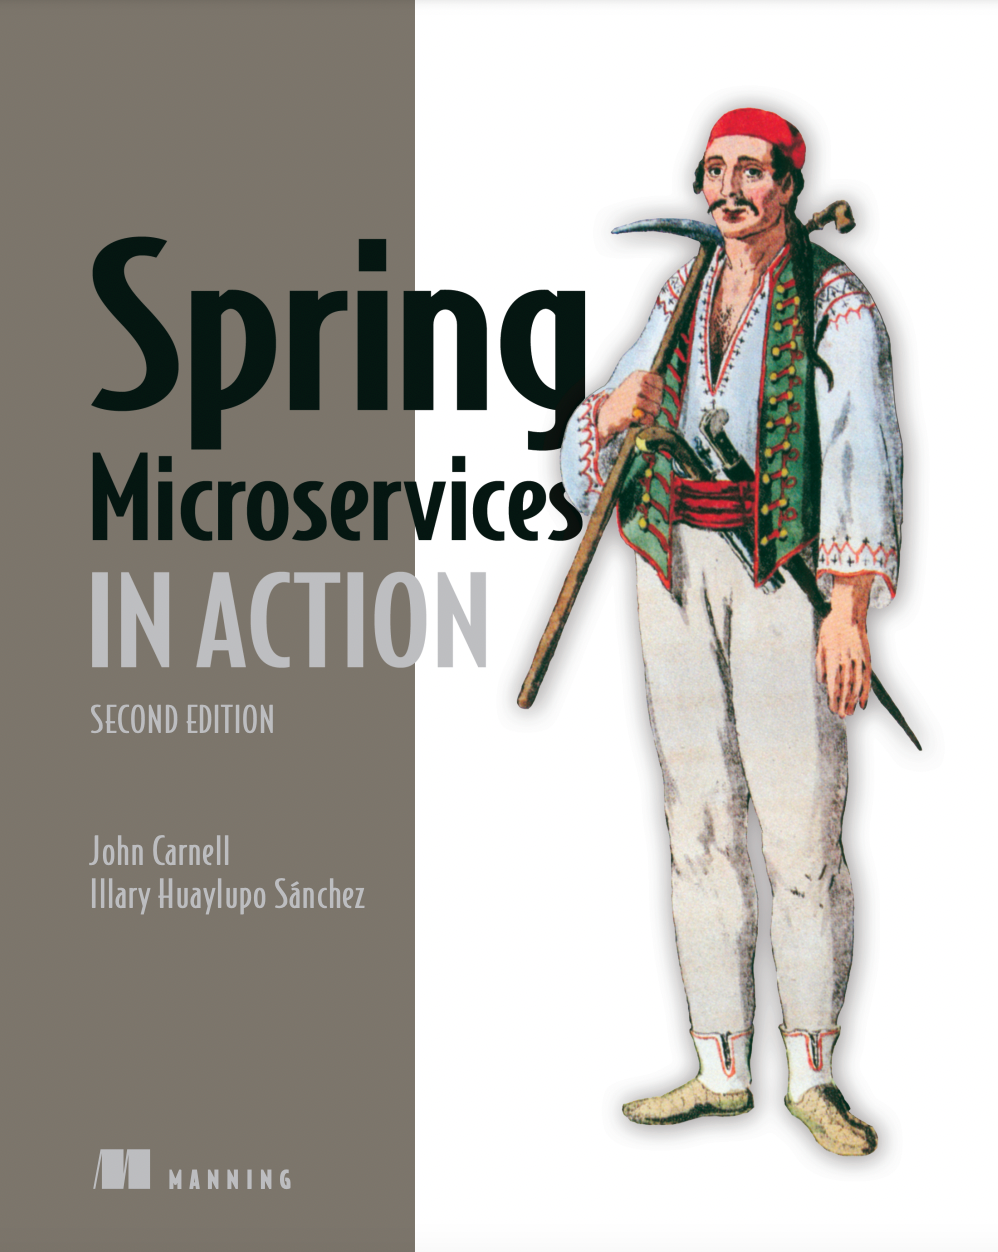 Spring Microservices in Action 2nd